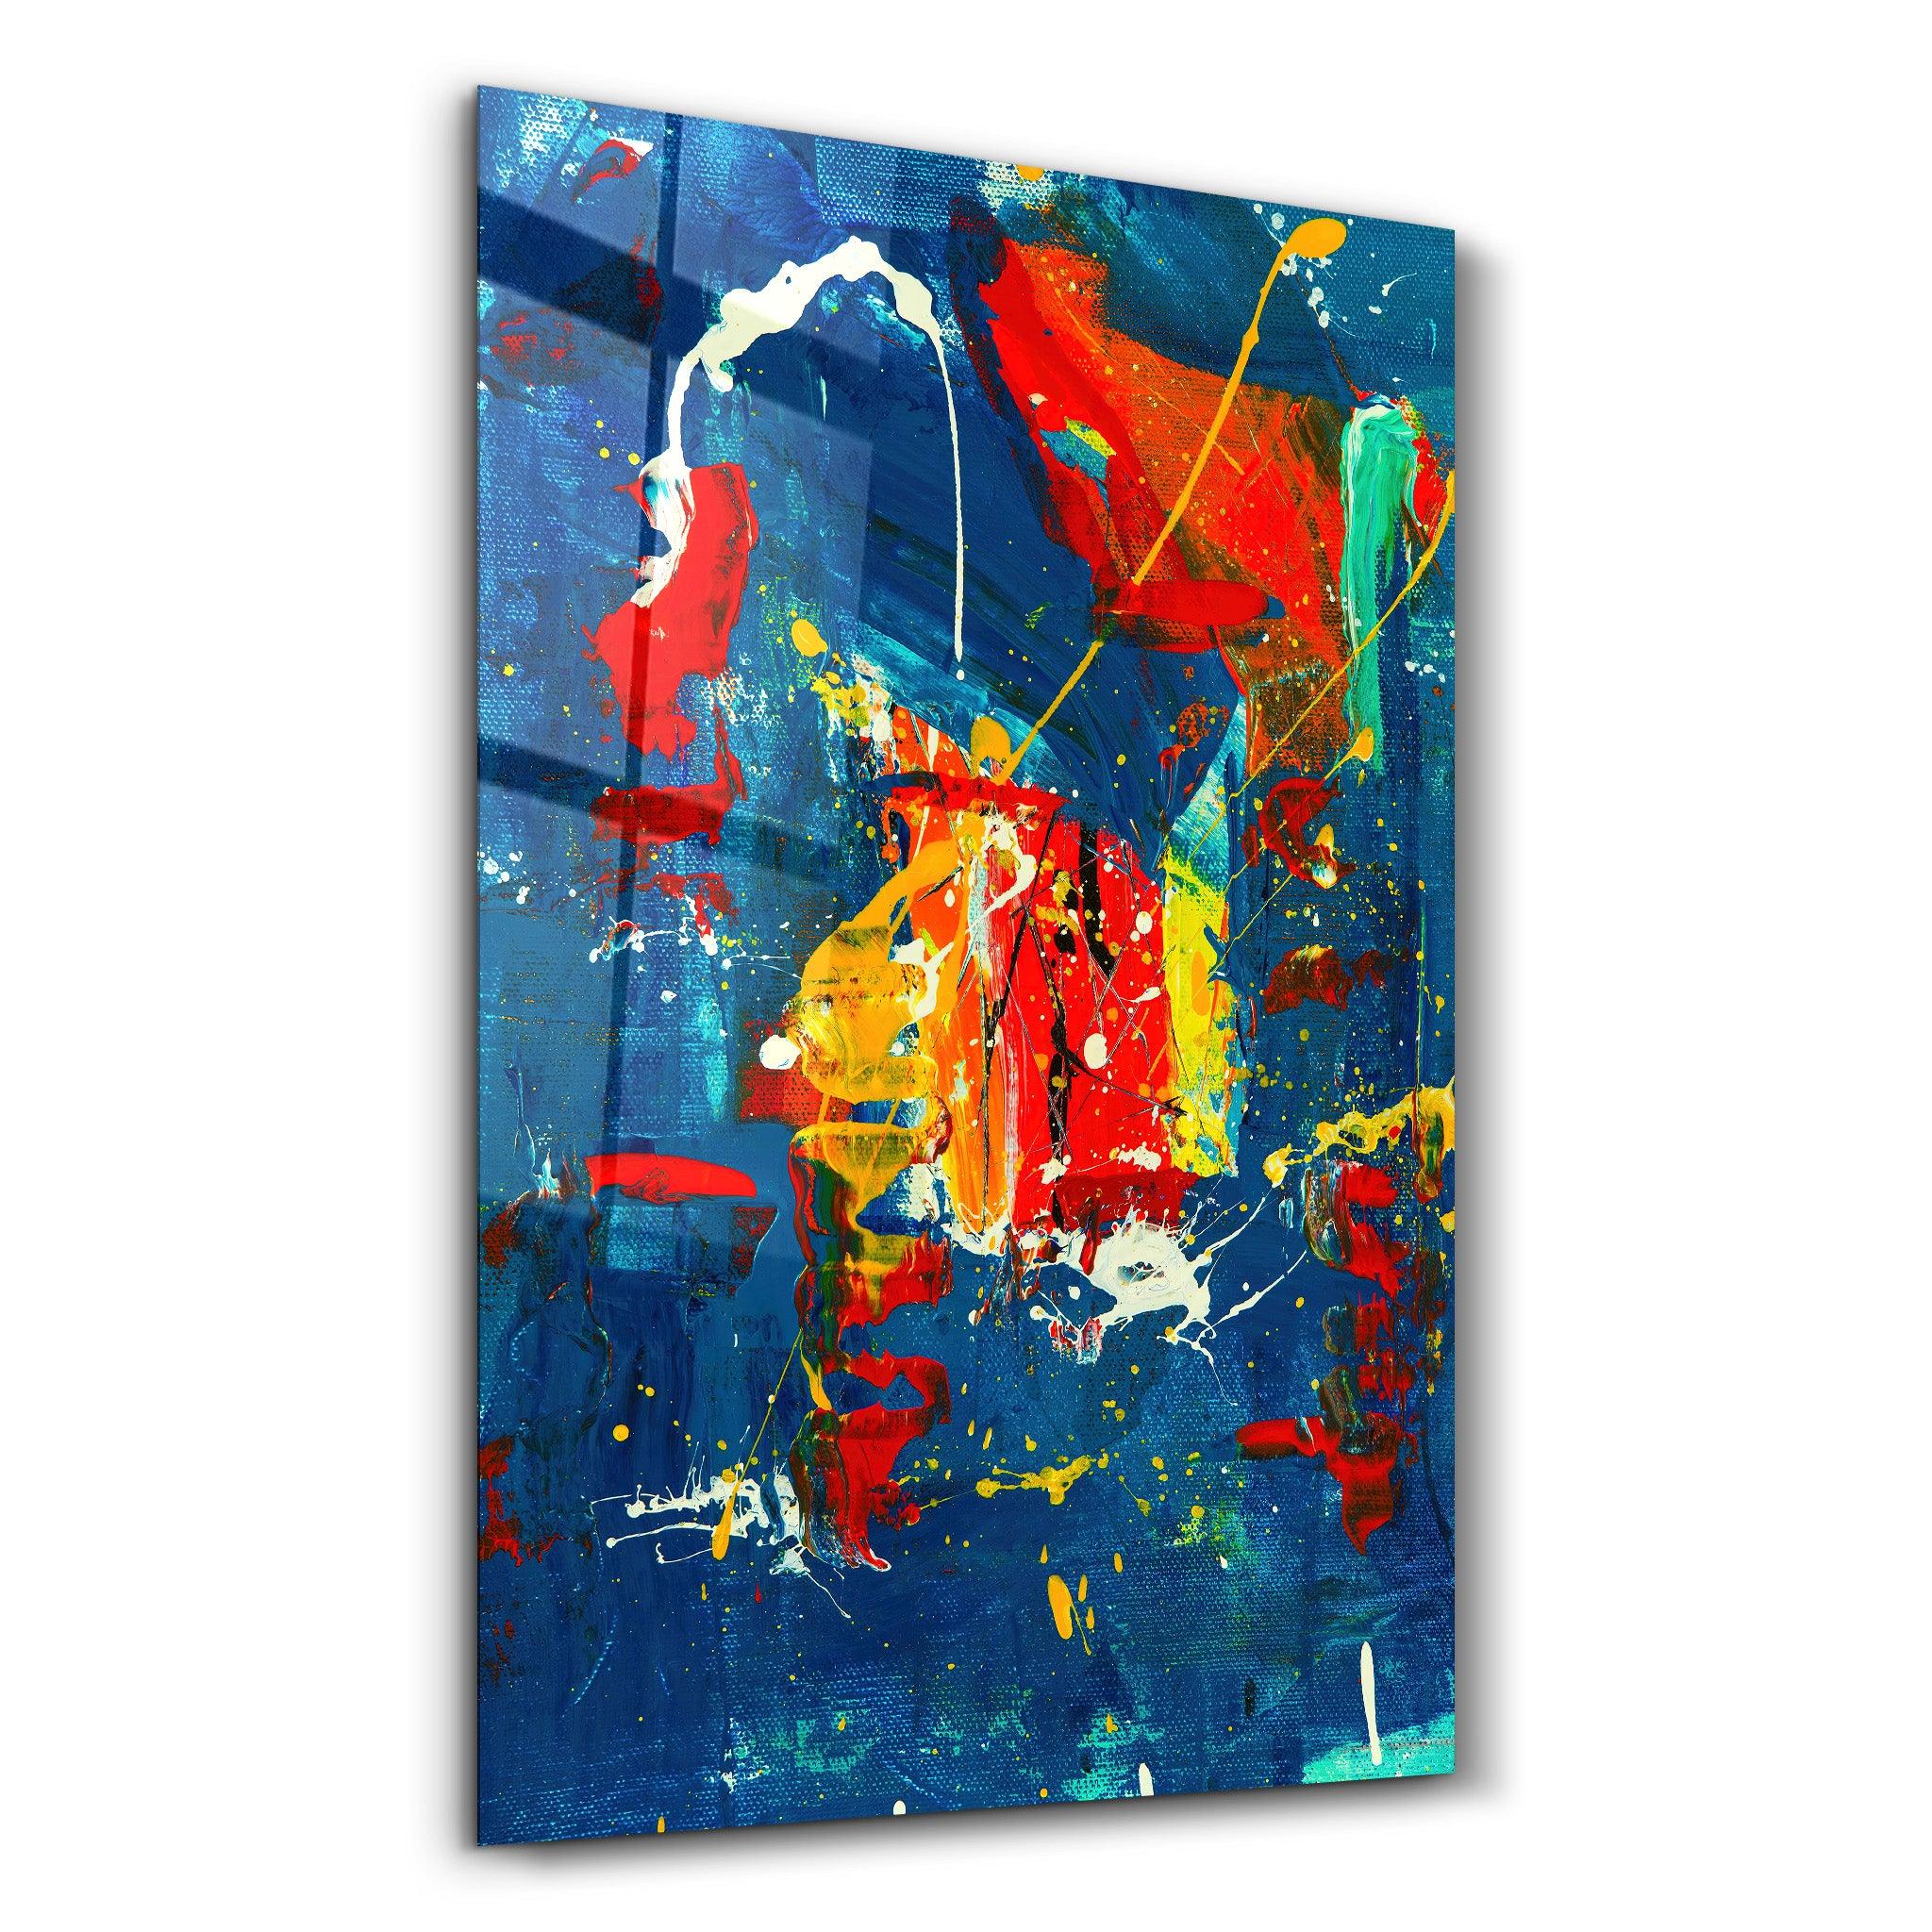 ・"Oil Painting - Abstract"・Designer's Collection Glass Wall Art - ArtDesigna Glass Printing Wall Art